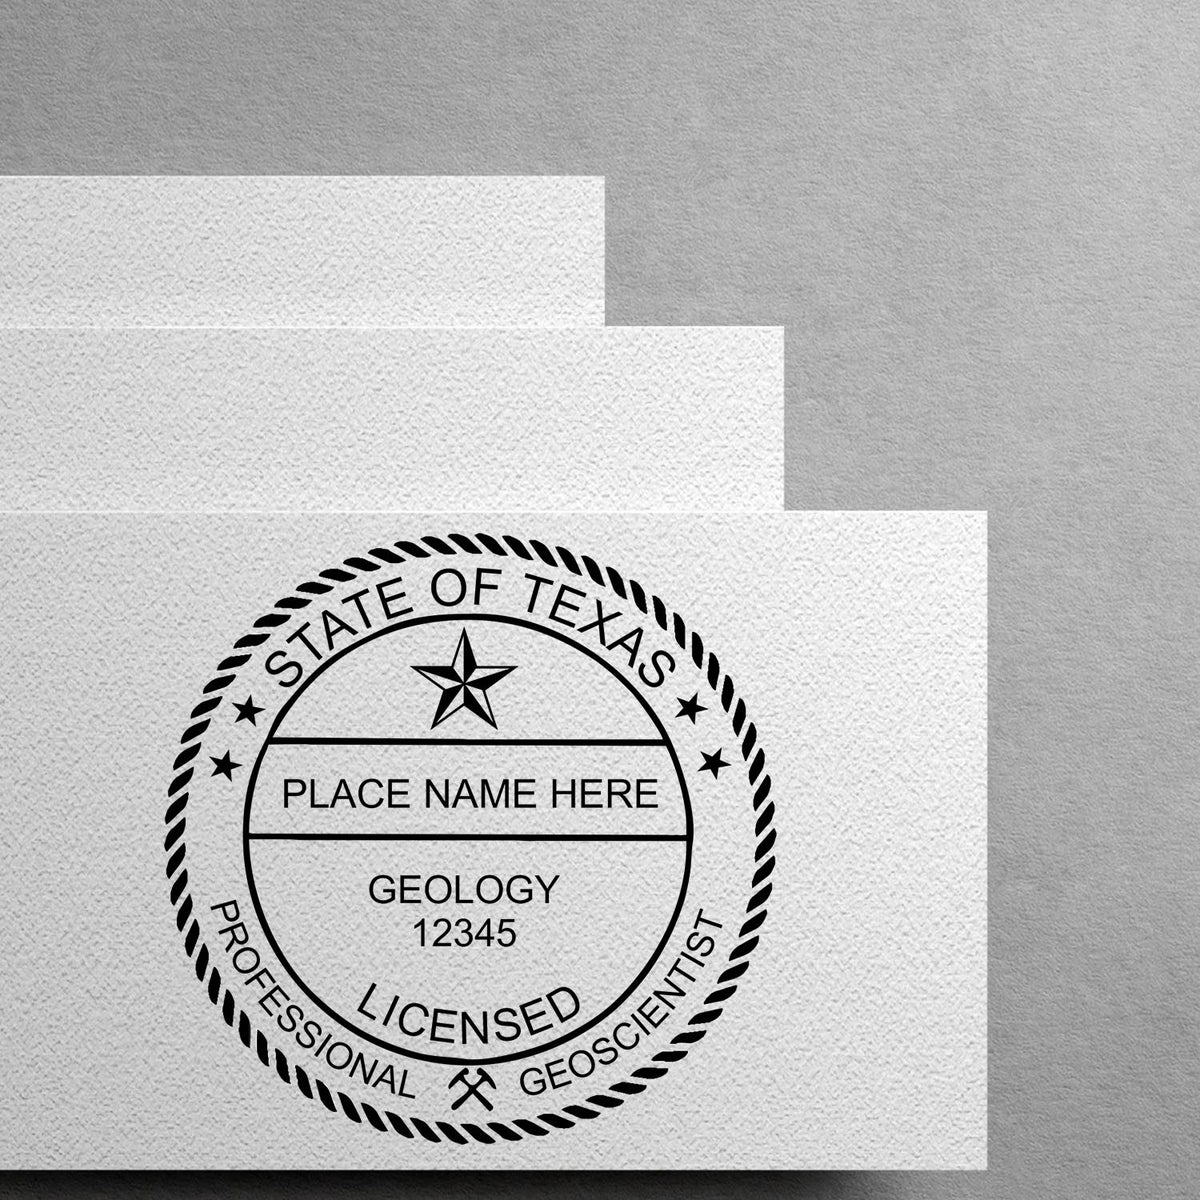 This paper is stamped with a sample imprint of the Premium MaxLight Pre-Inked Texas Geology Stamp, signifying its quality and reliability.